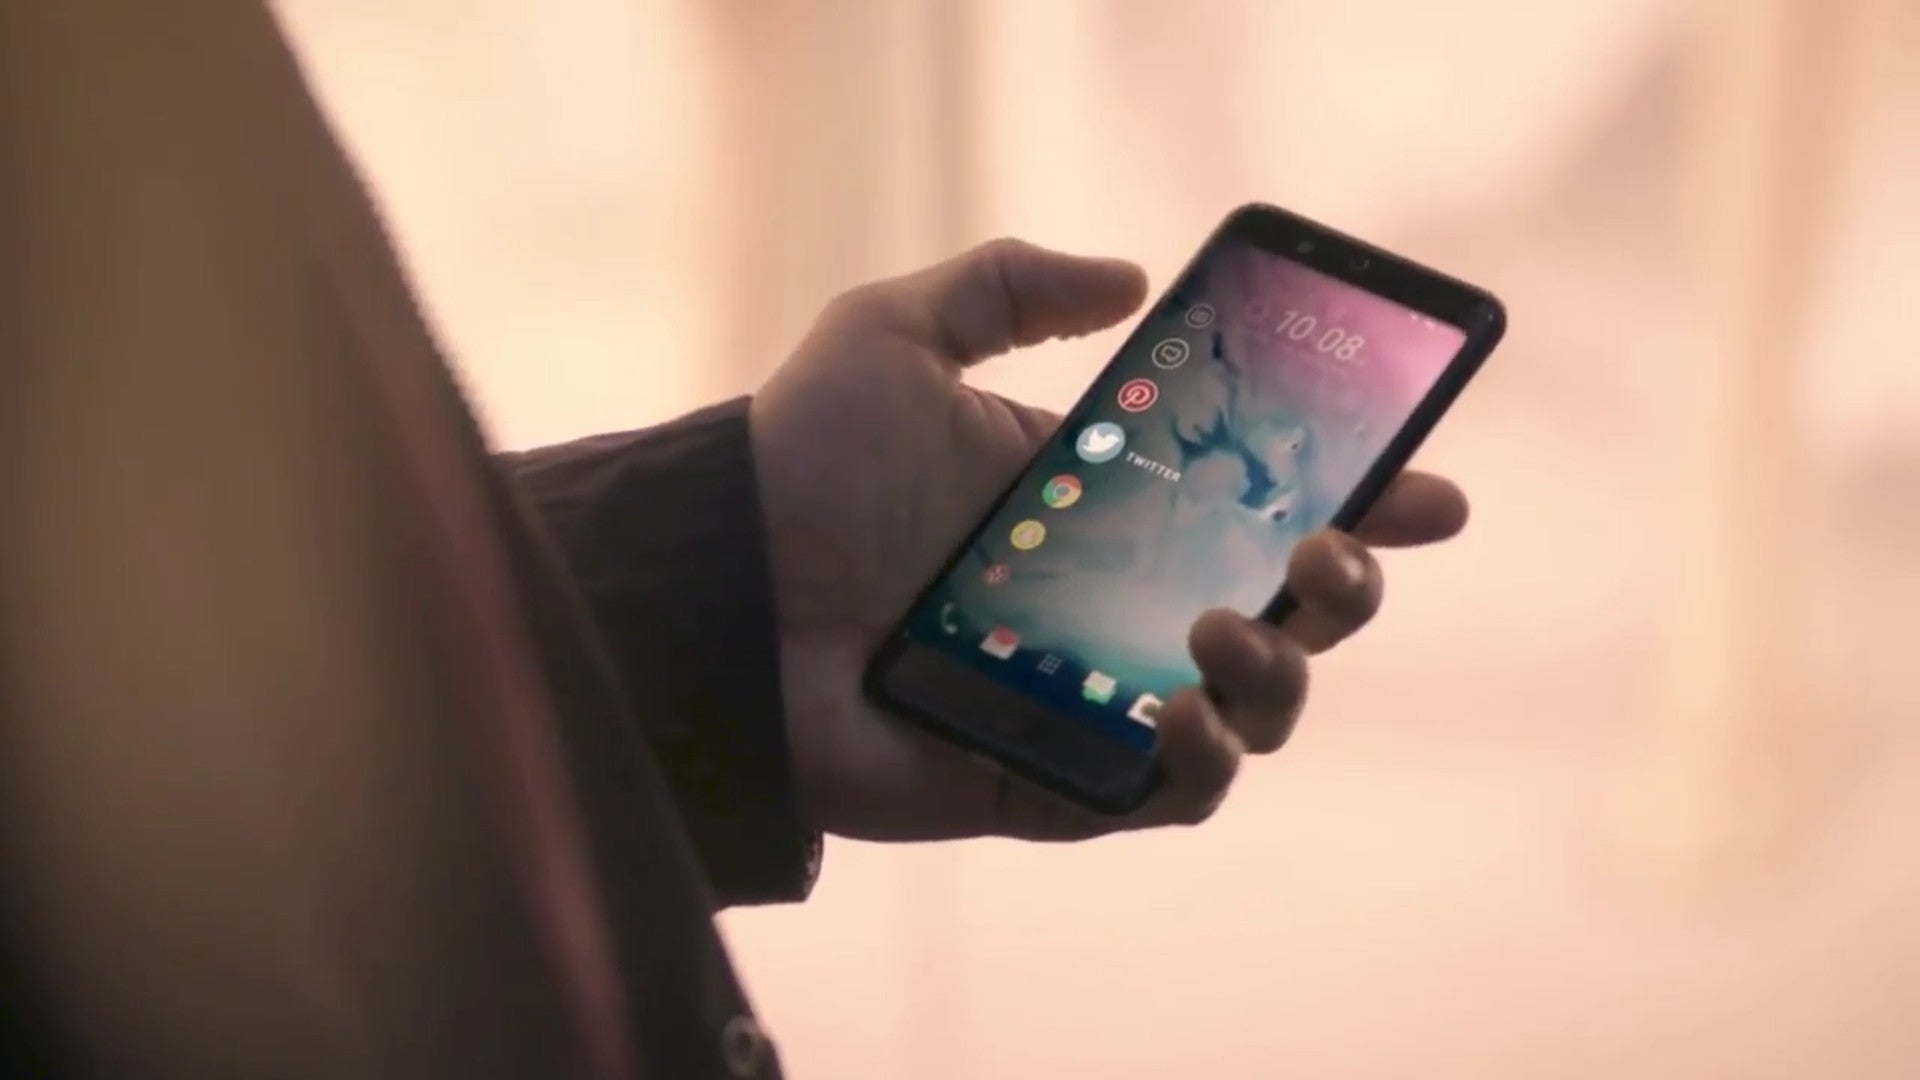 HTC Ocean promotional video leaks ahead of official announcement (UPDATE)